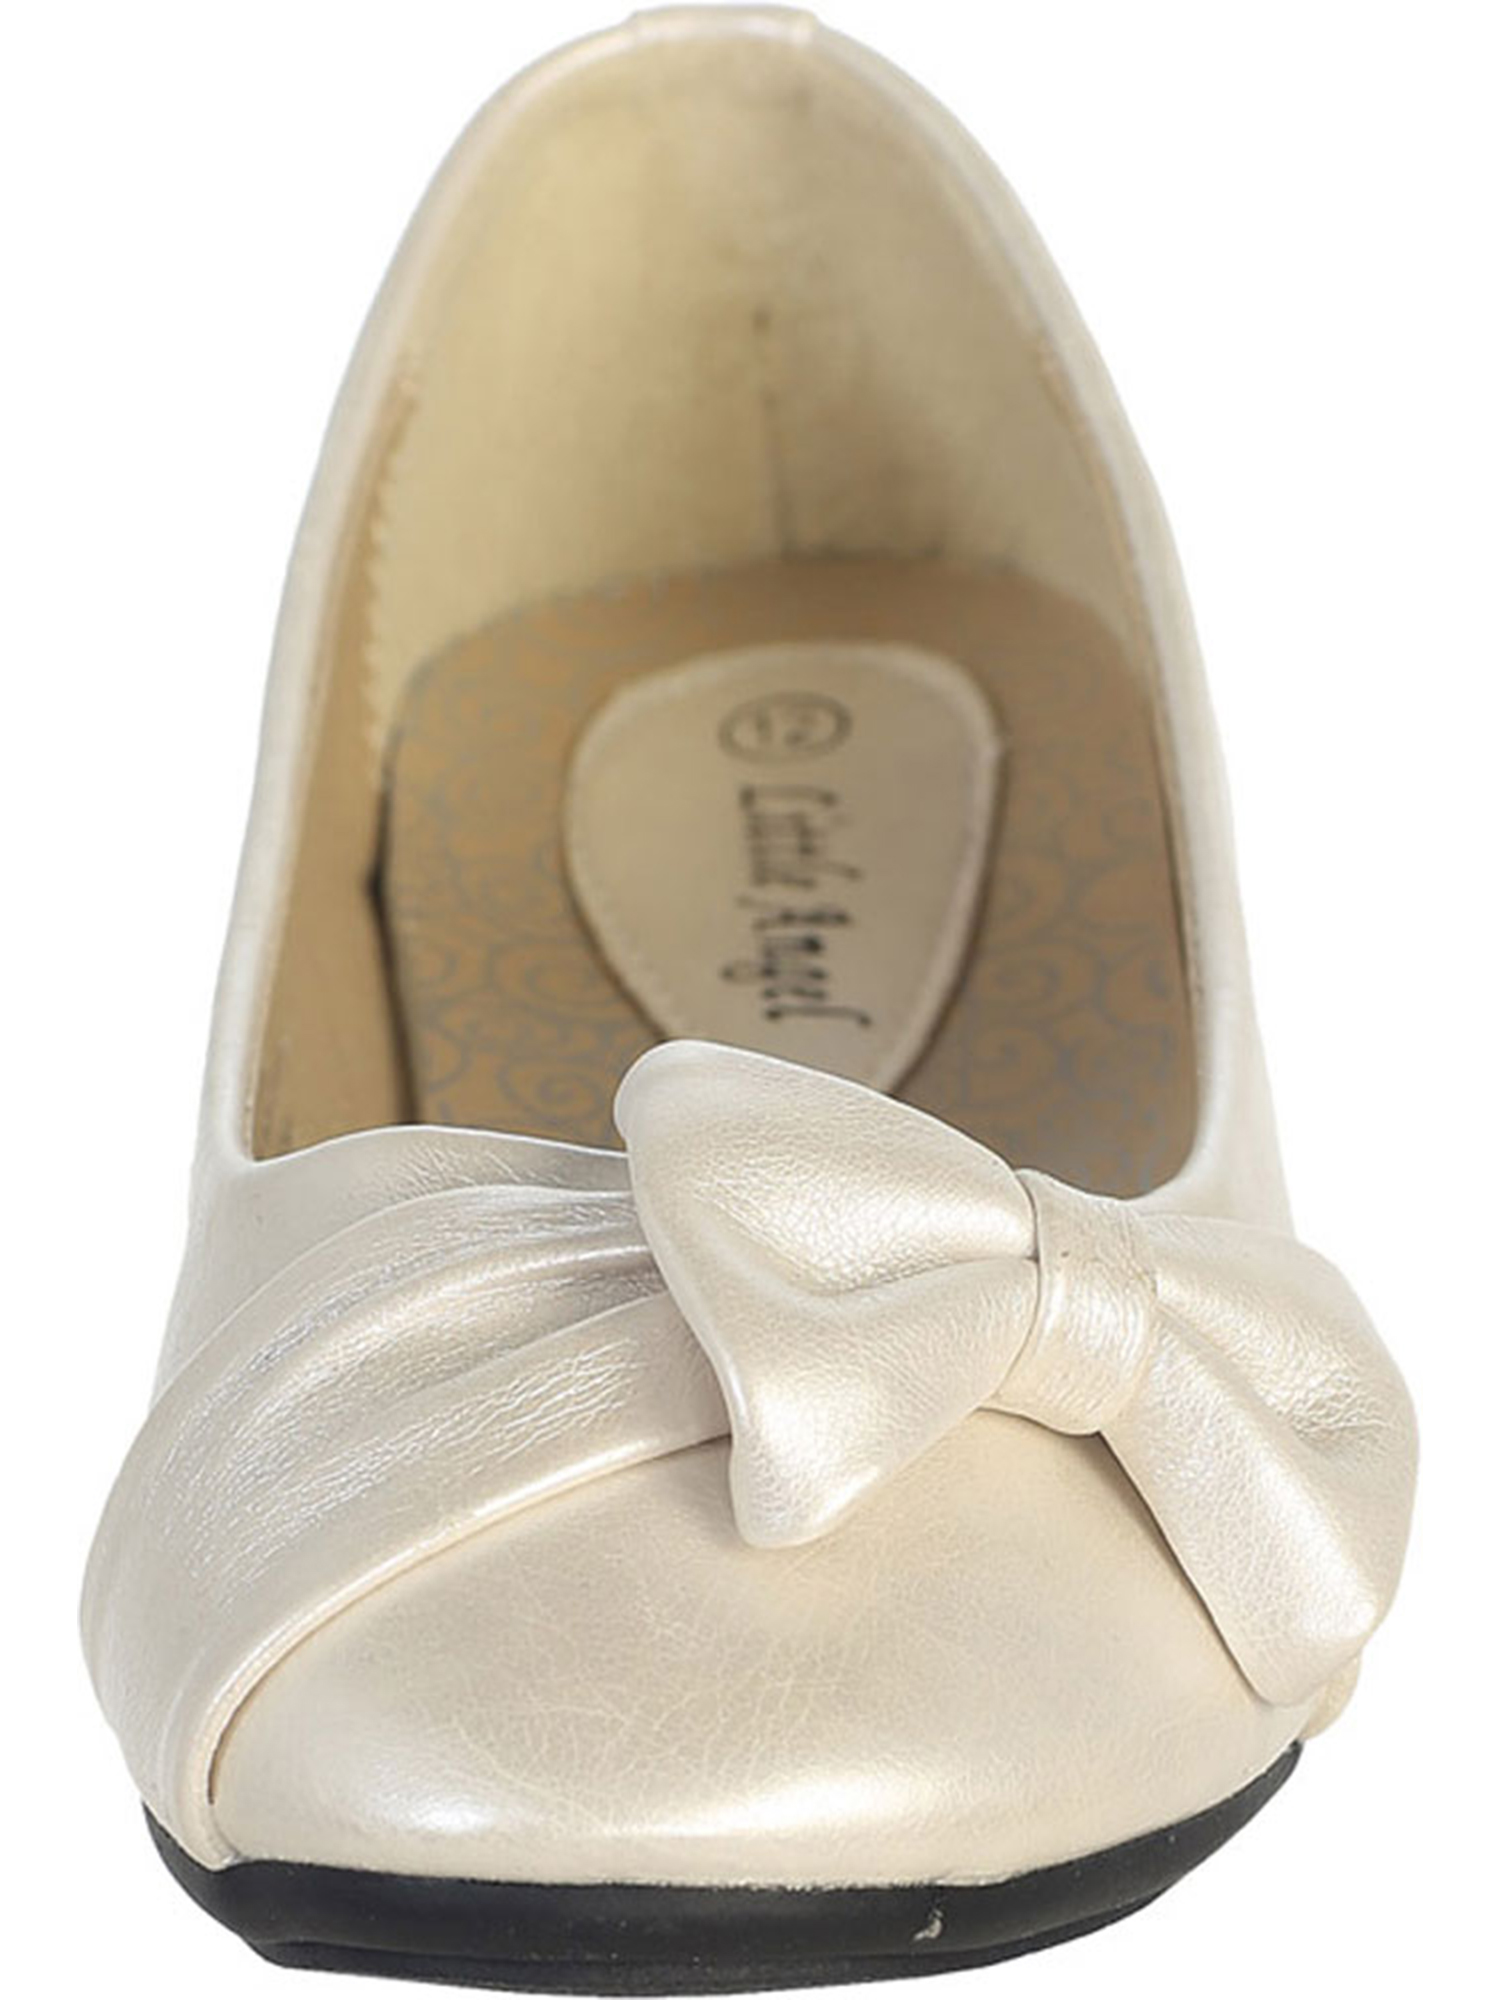 Ivory Pearl Girl's Flat Shoes with Side Bow Infant 8